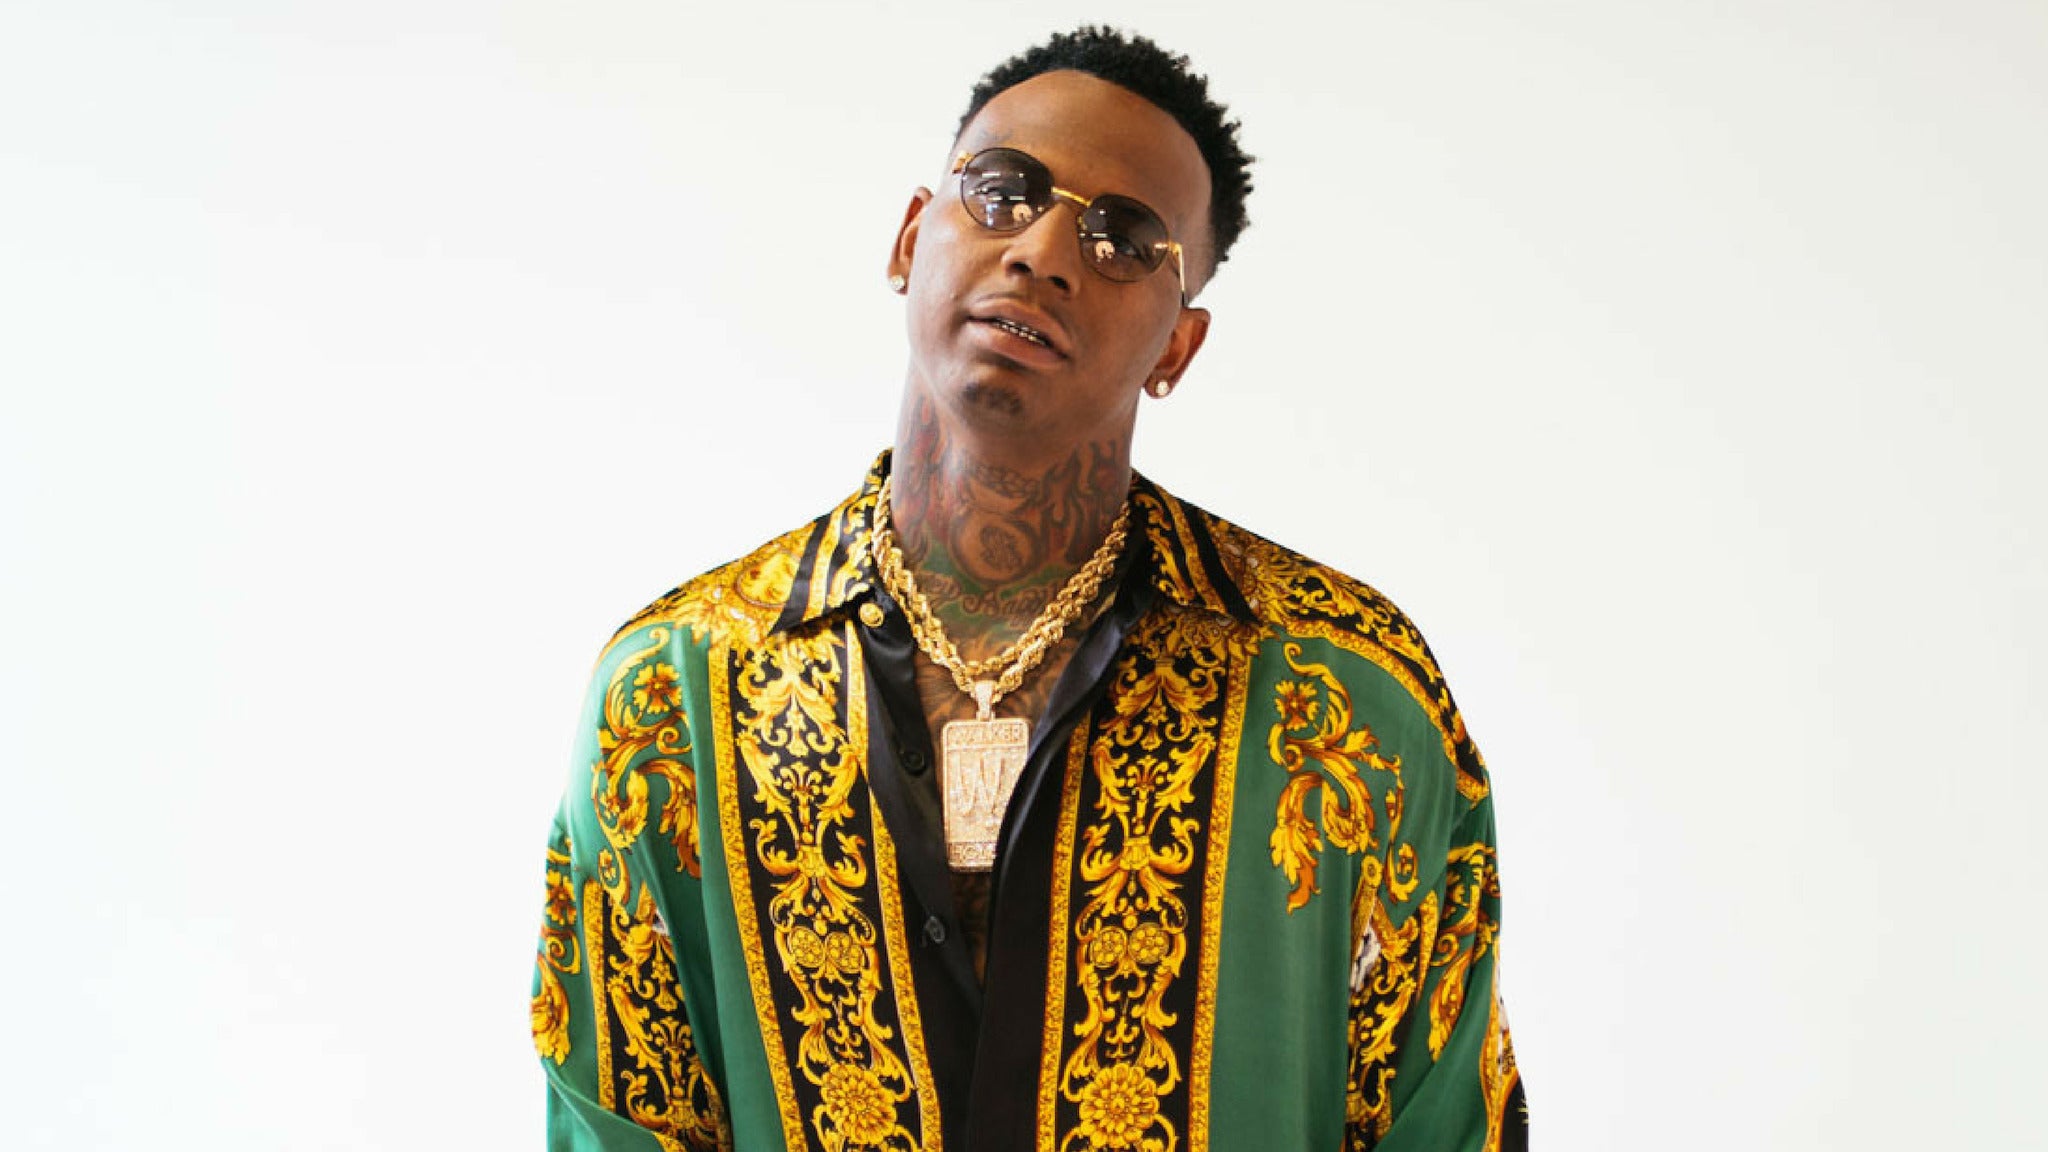 Moneybagg Yo - Word 4 Word Tour in Los Angeles promo photo for Official Platinum presale offer code